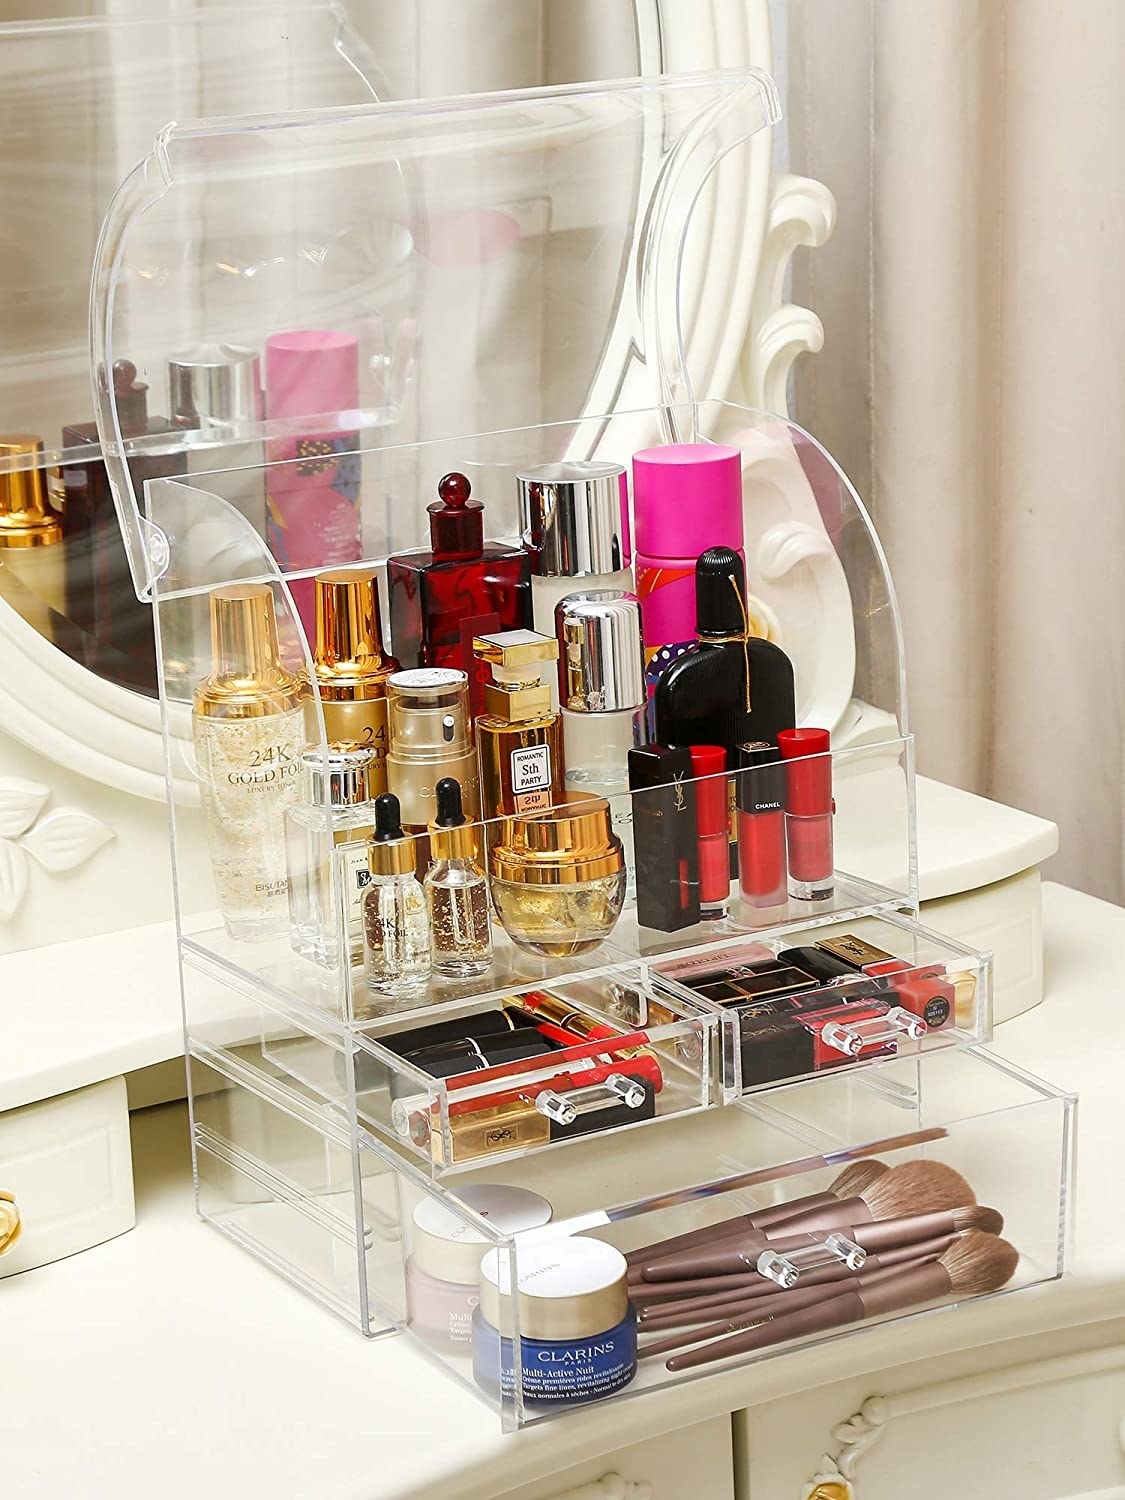 the clear container filled with beauty products